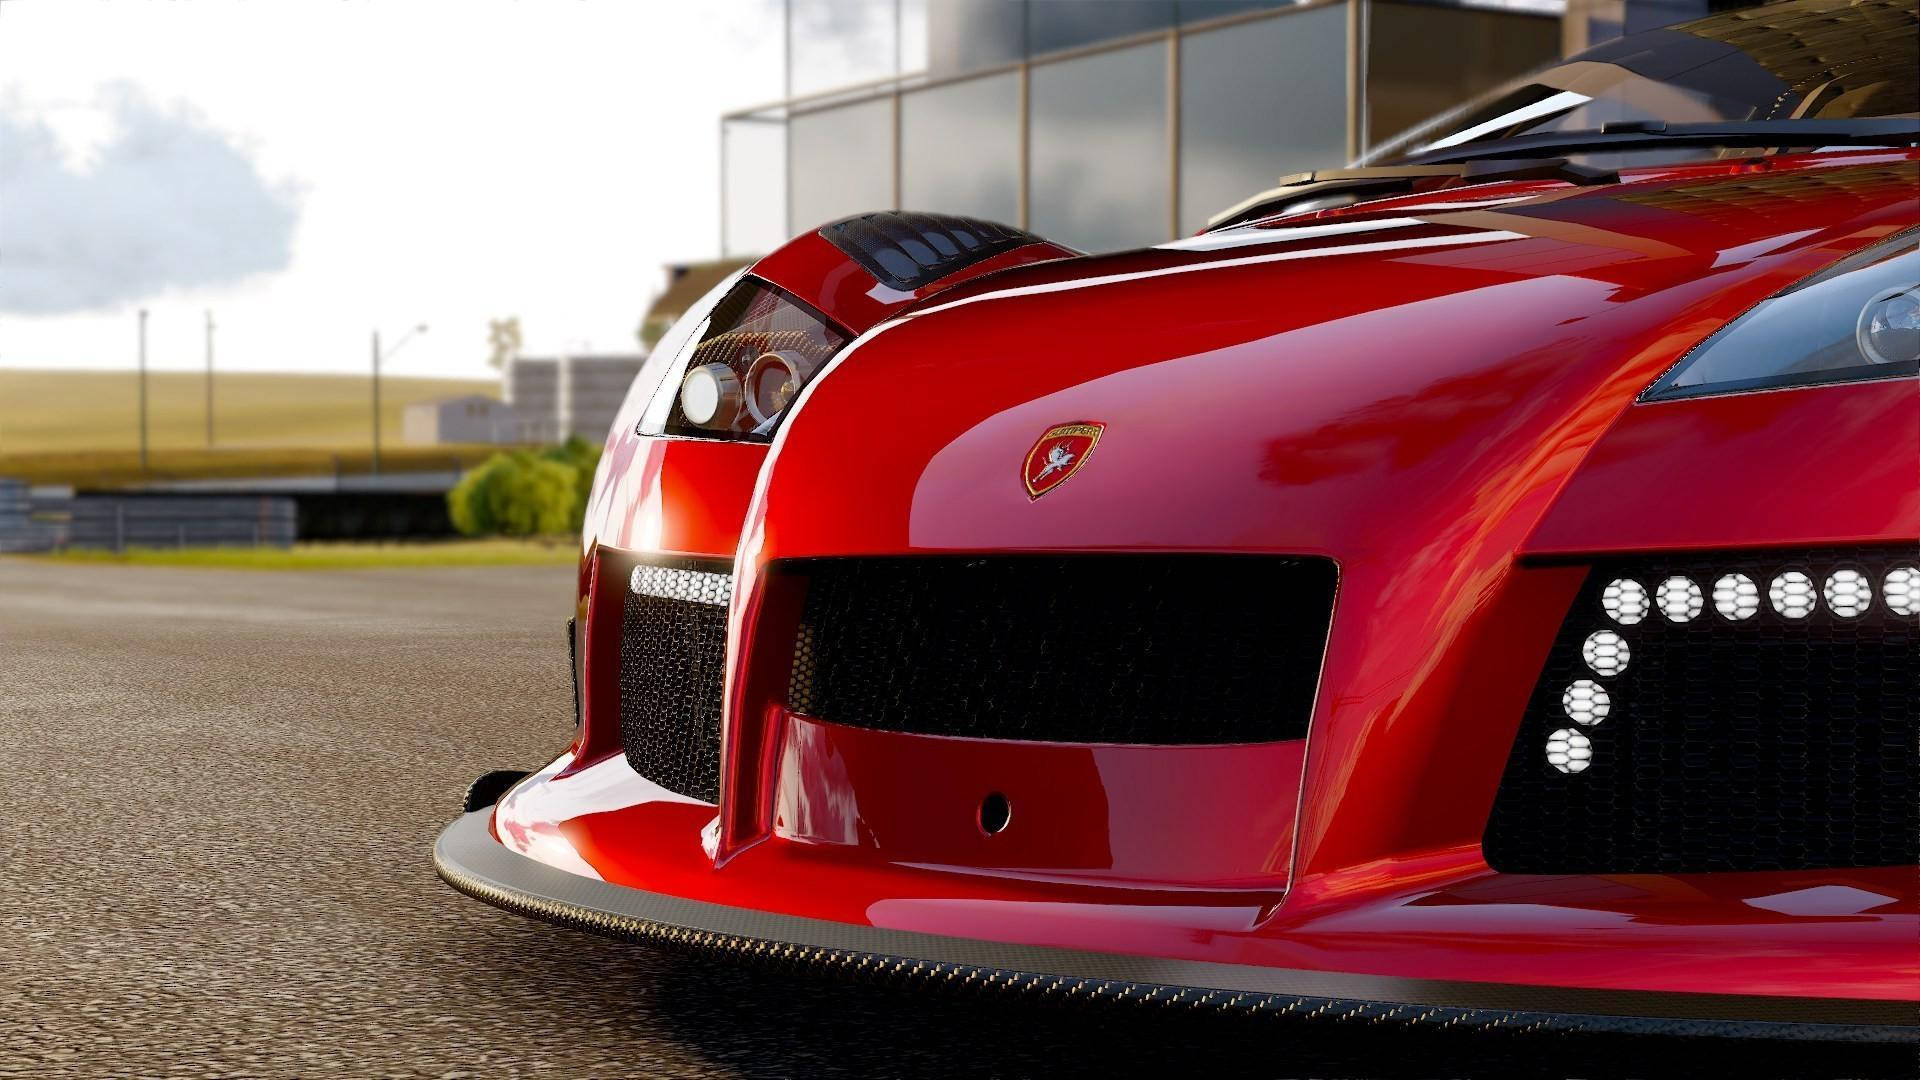 Caption: Gumpert Apollo In Action On Project Cars Background